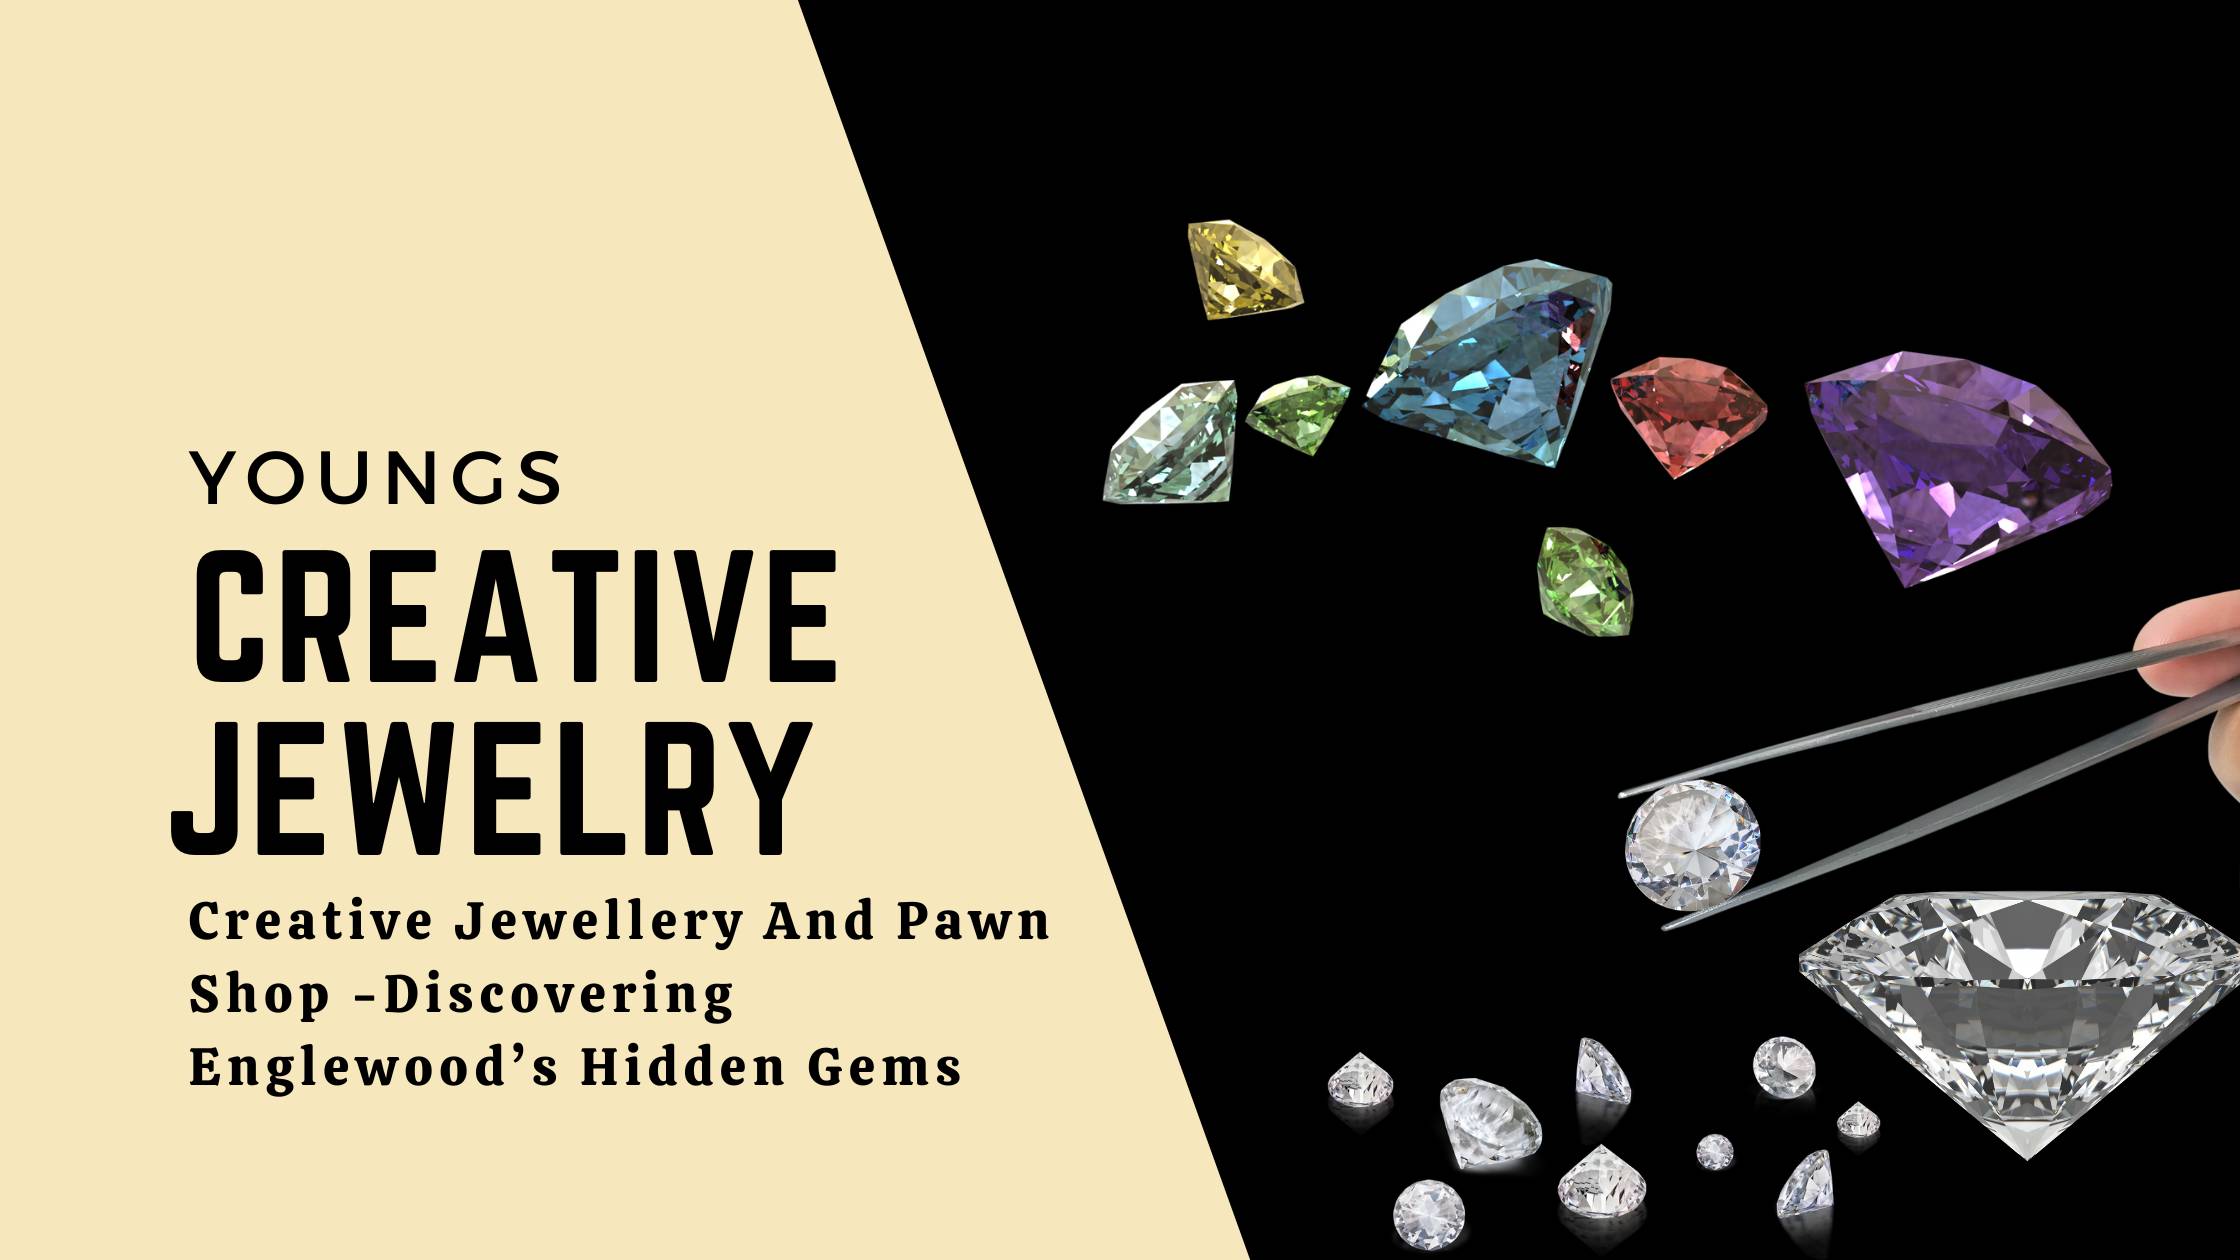 Creative Jewellery And Pawn Shop -Discovering Englewood’s Hidden Gems